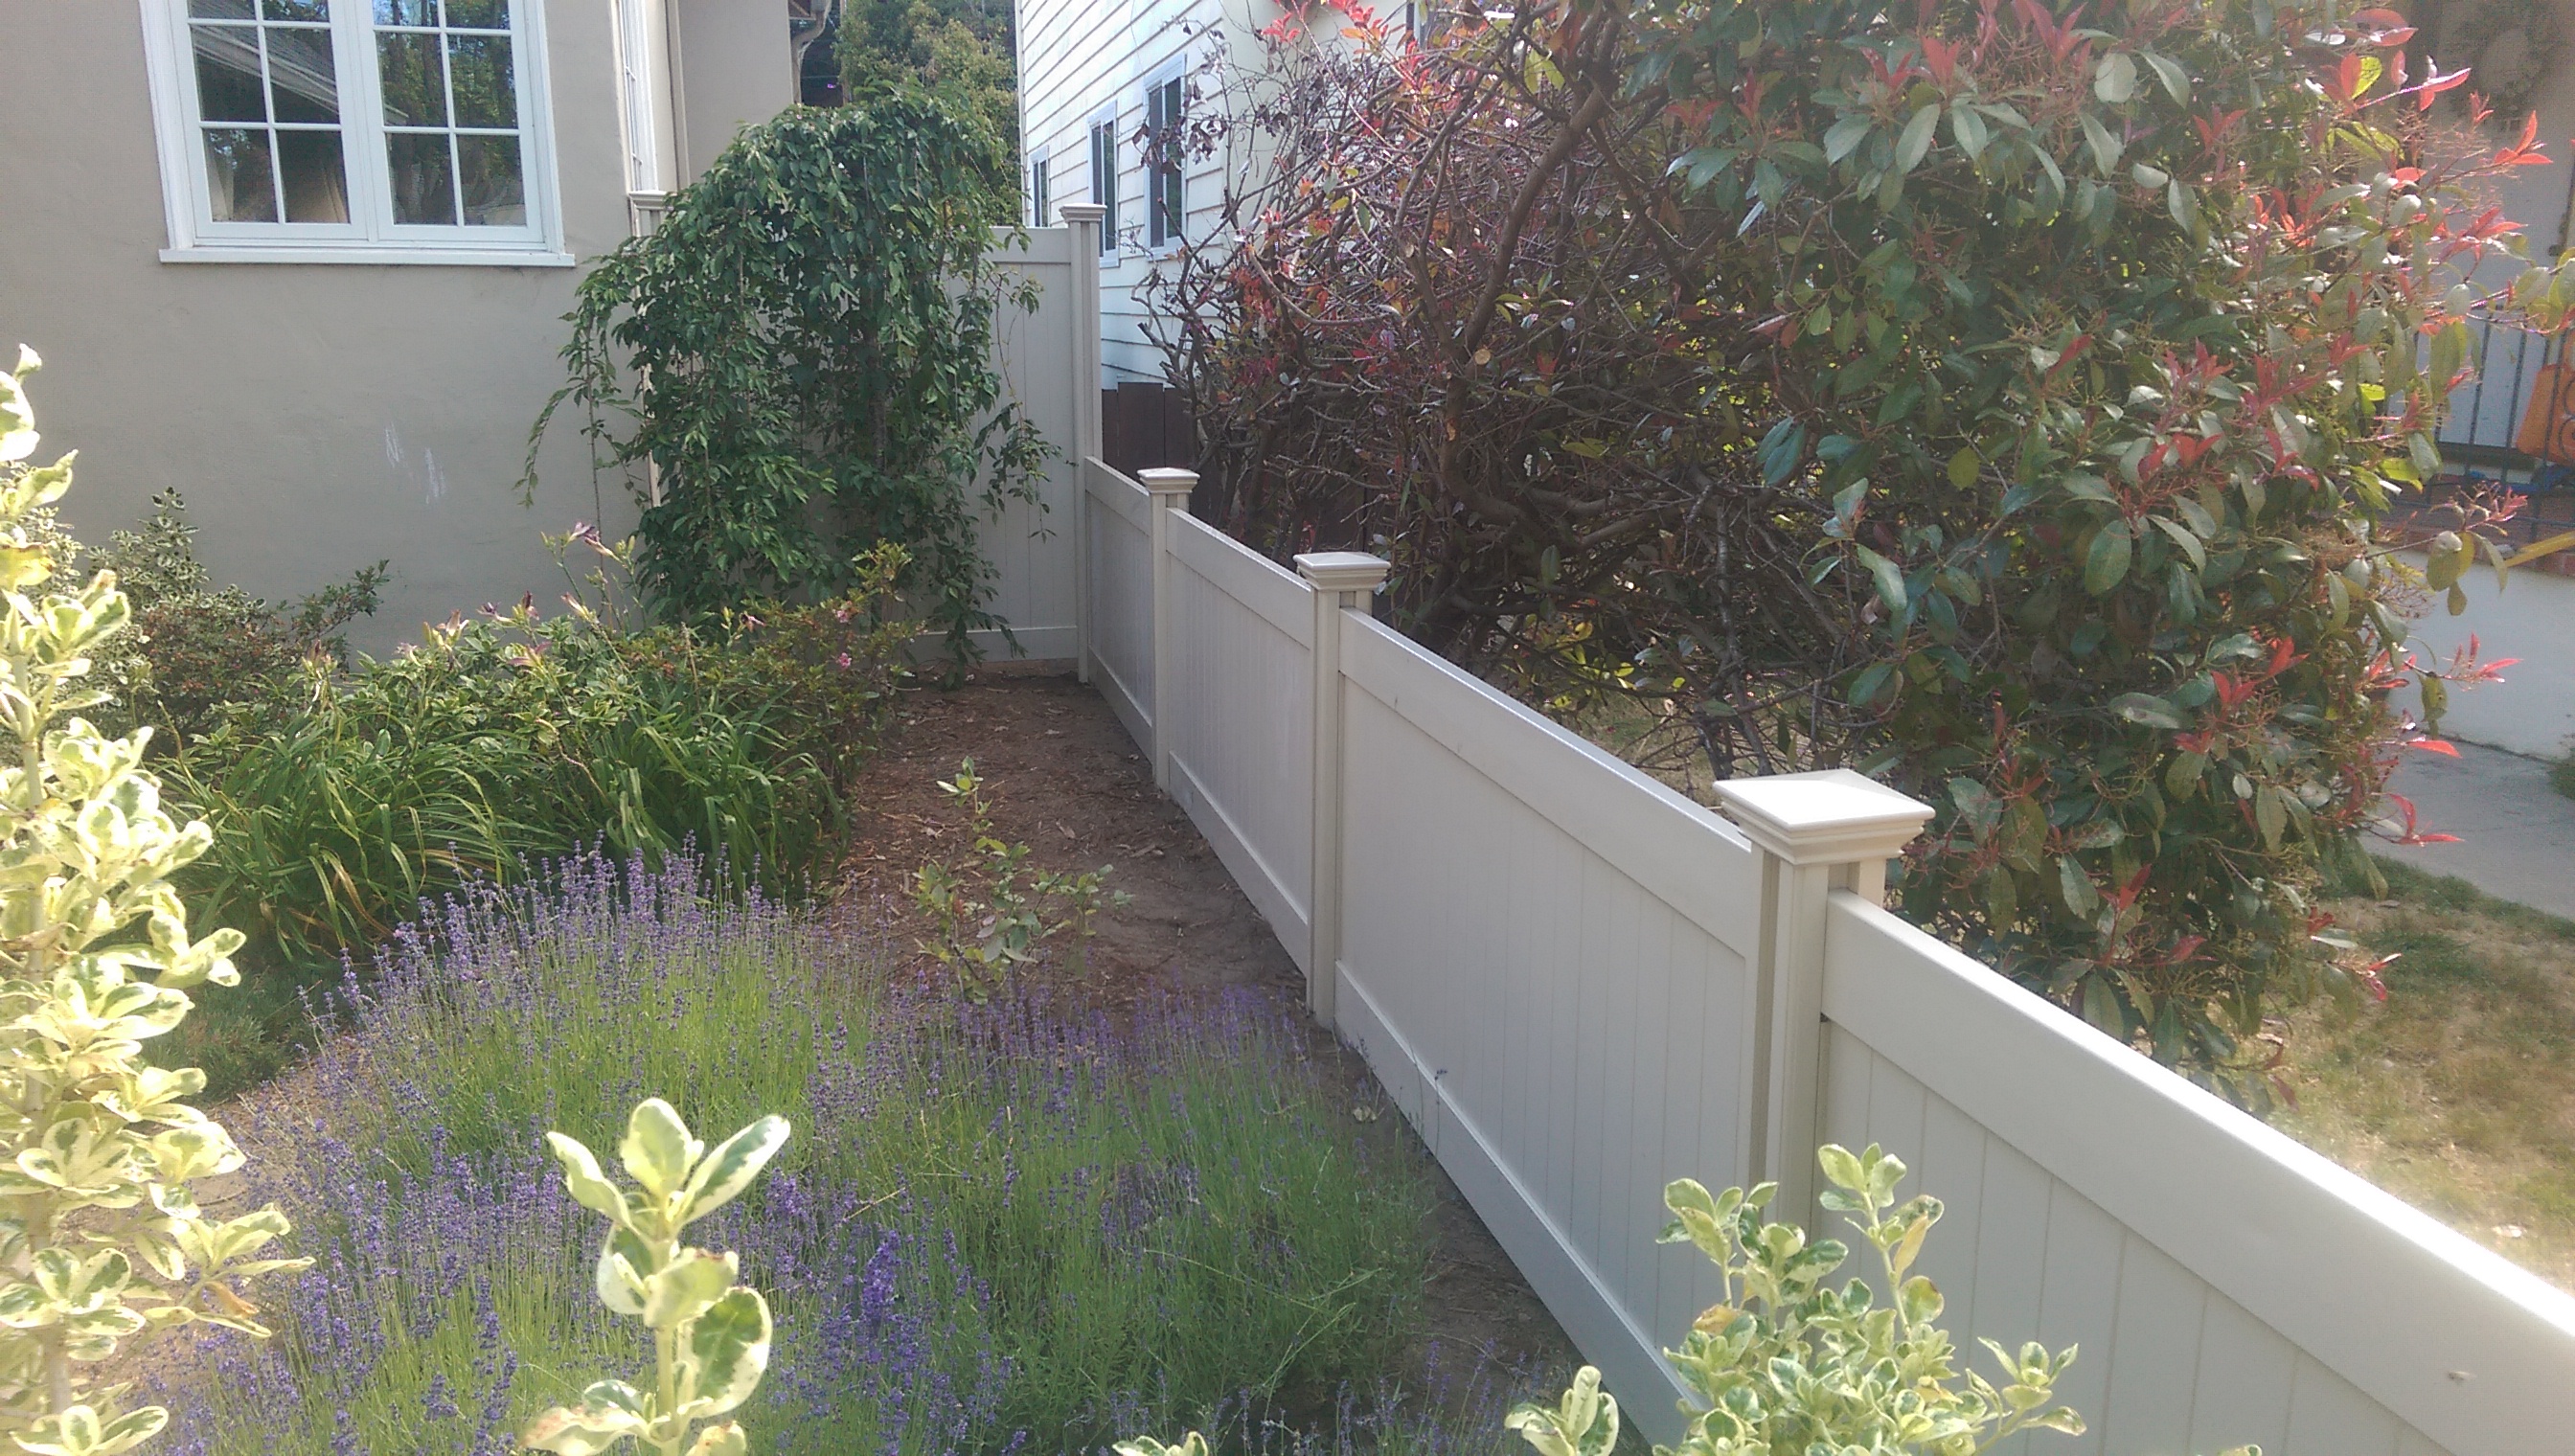 Dan replaced the wood fence with a tan privacy fence. He cuts it down from 6ft to 4ft.